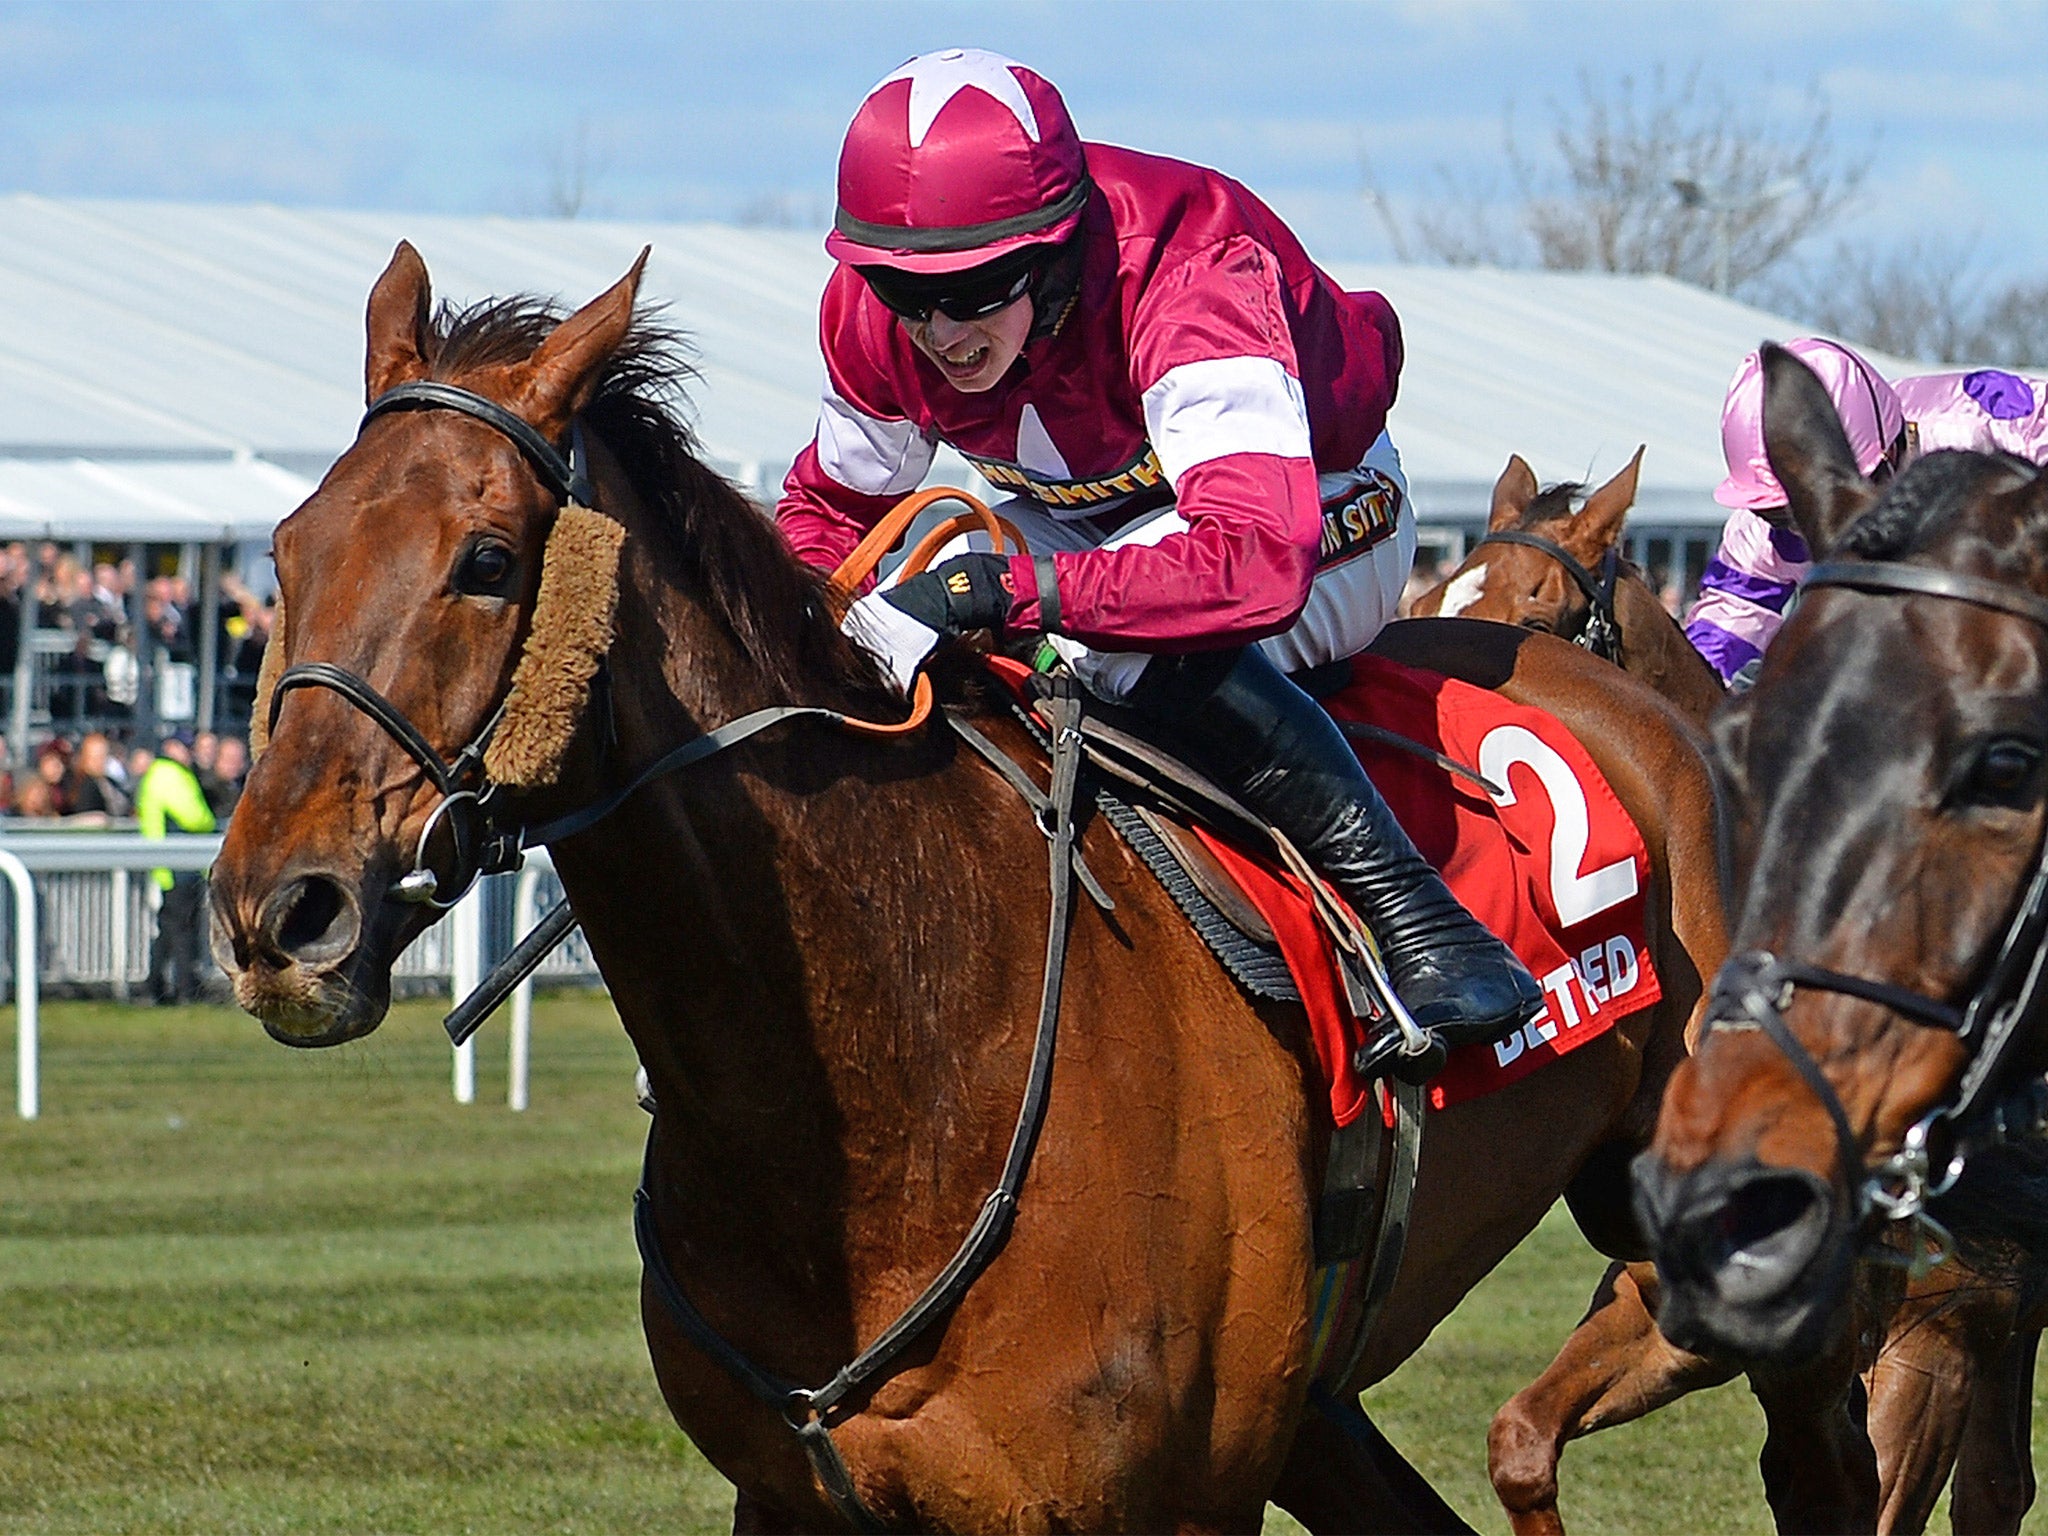 First Lieutenant competing at Aintree in 2013